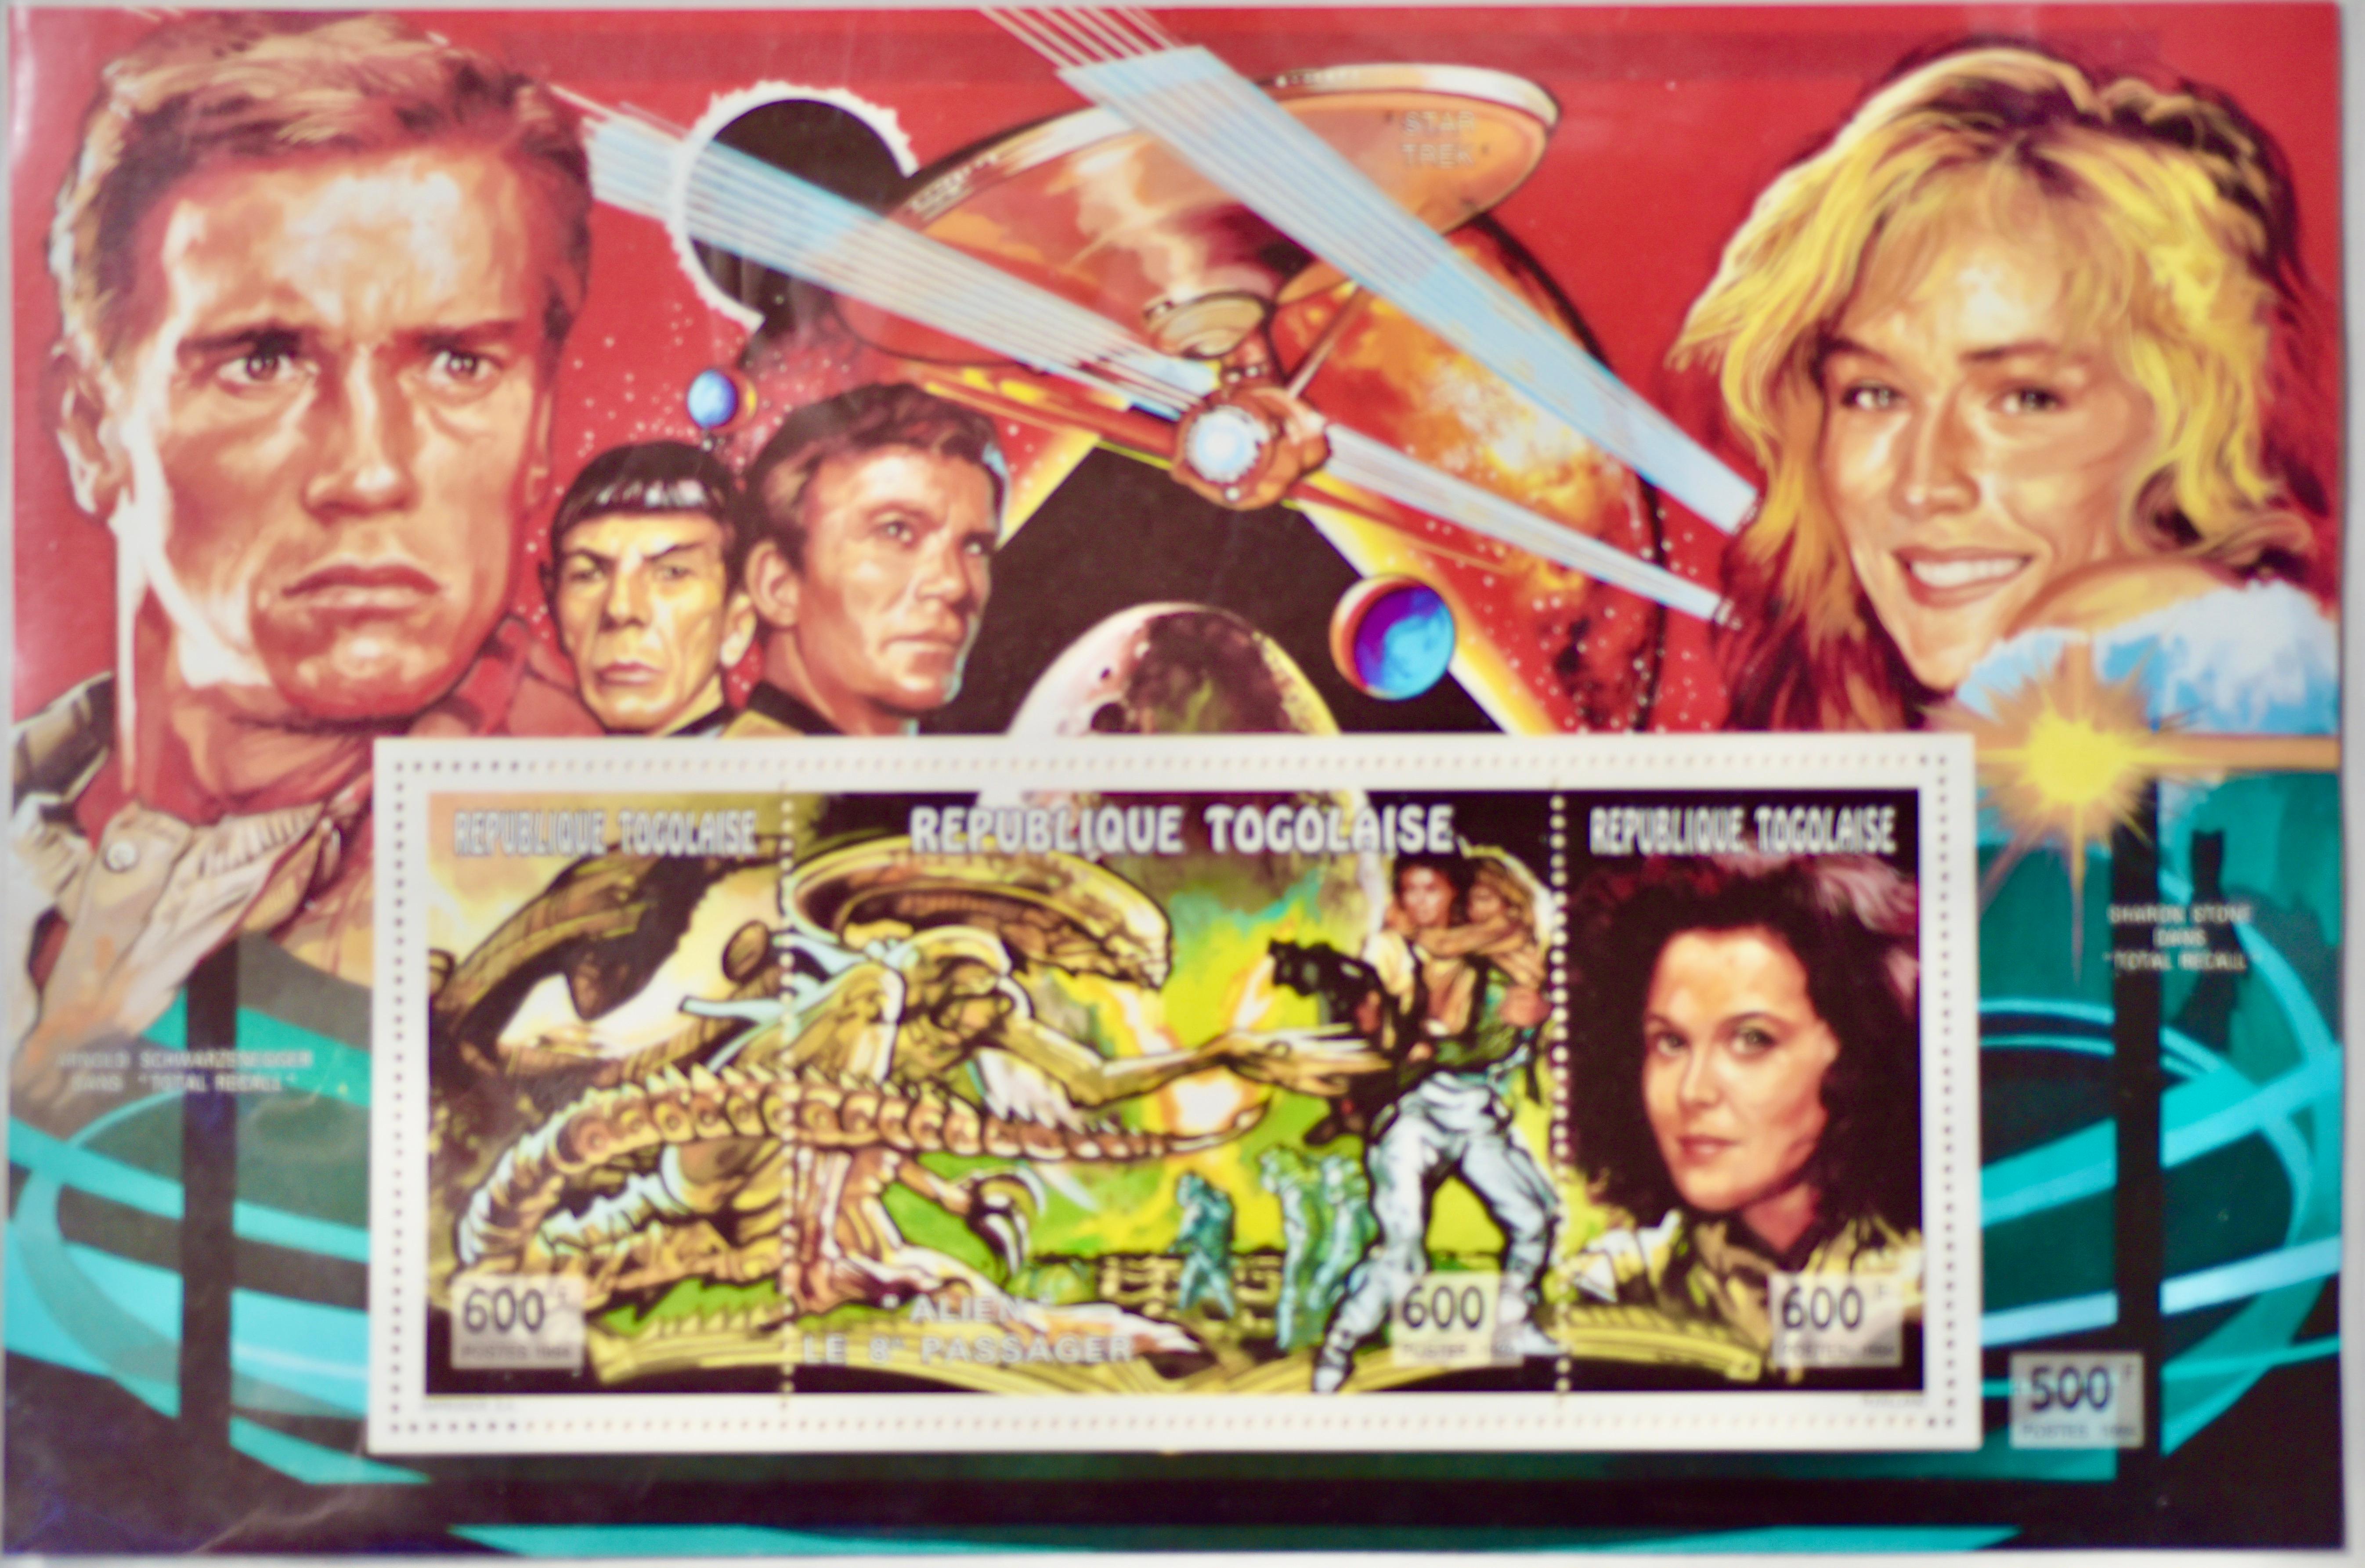 Star Trek stamps from Togo